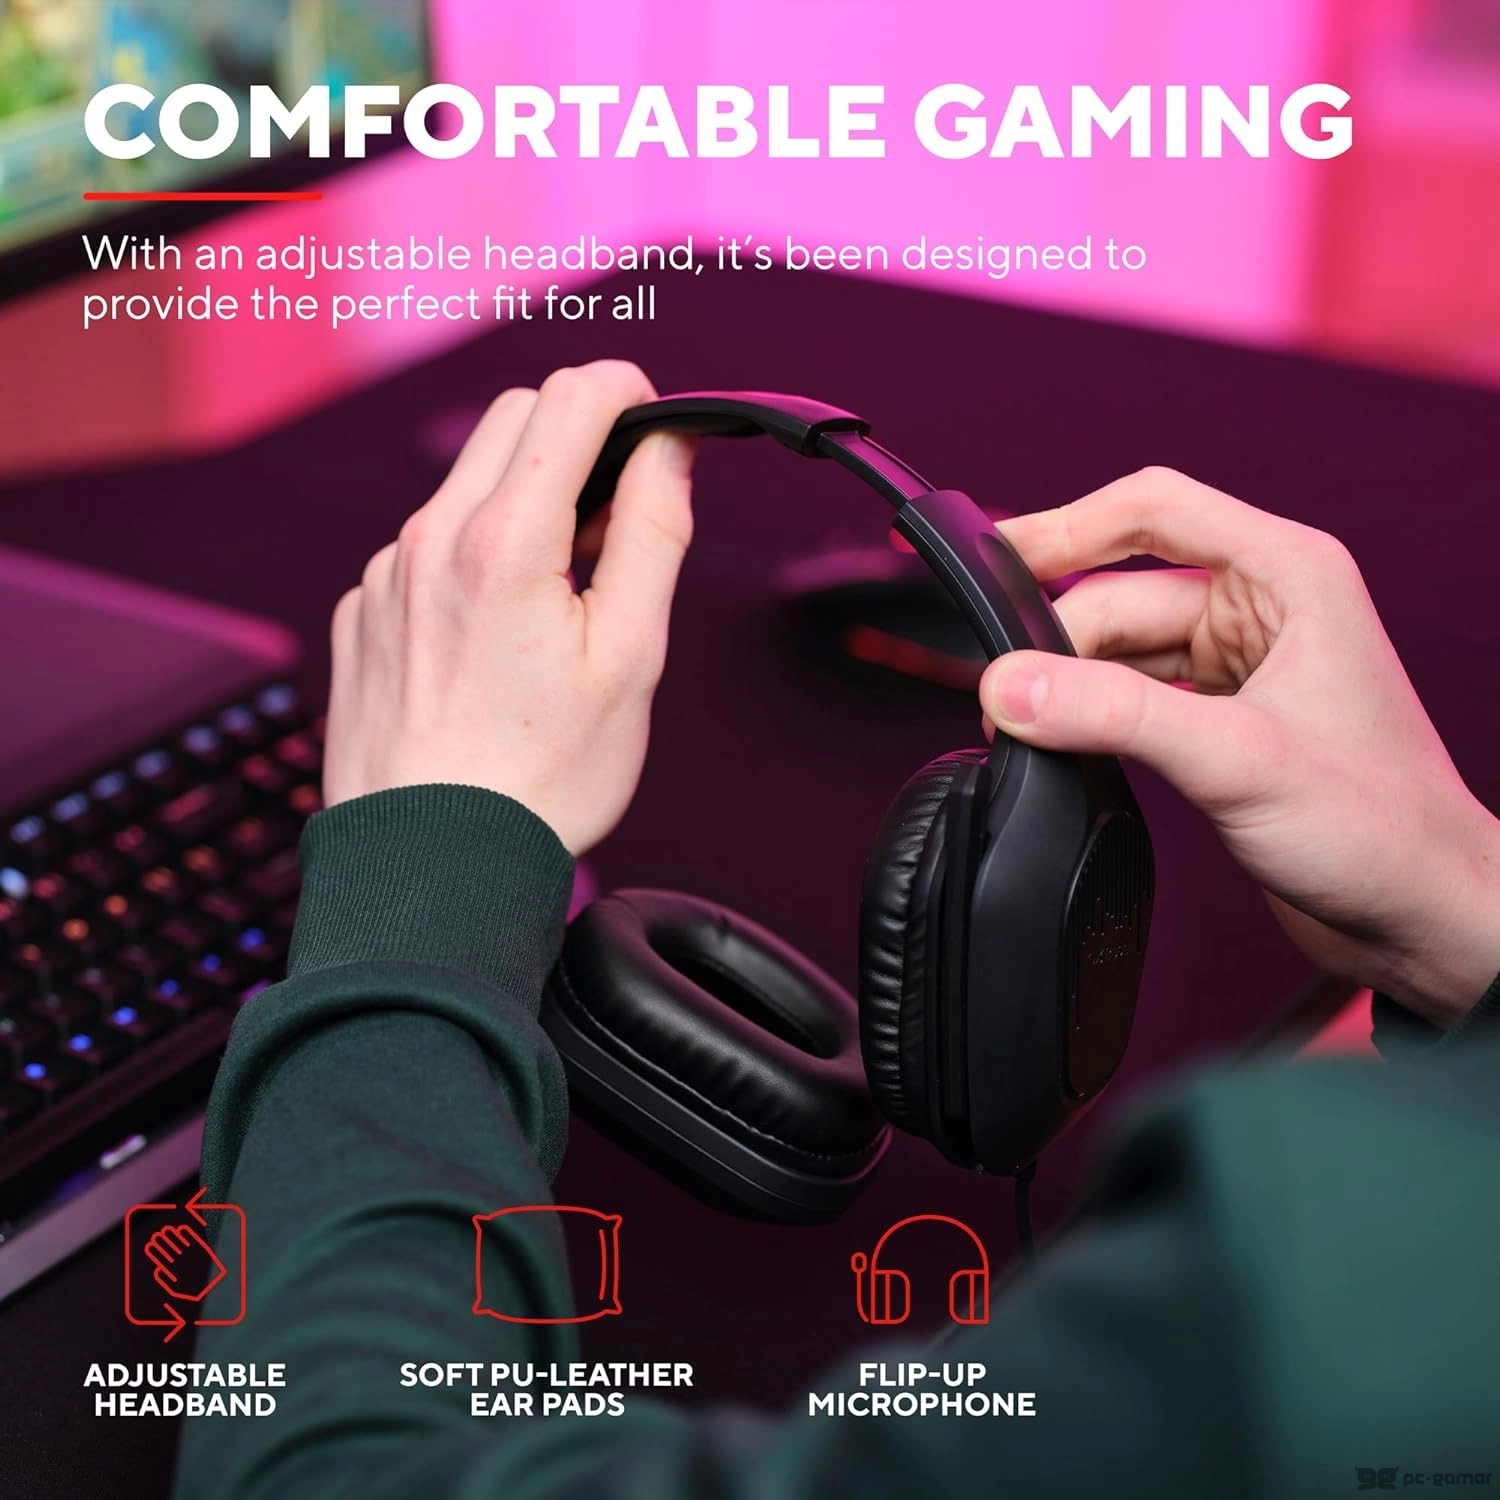 TRUST GXT 415 ZIROX Gaming Headset, over-ear, 3.5mm audio, PC, PS4, PS5, Nintendo, Xbox